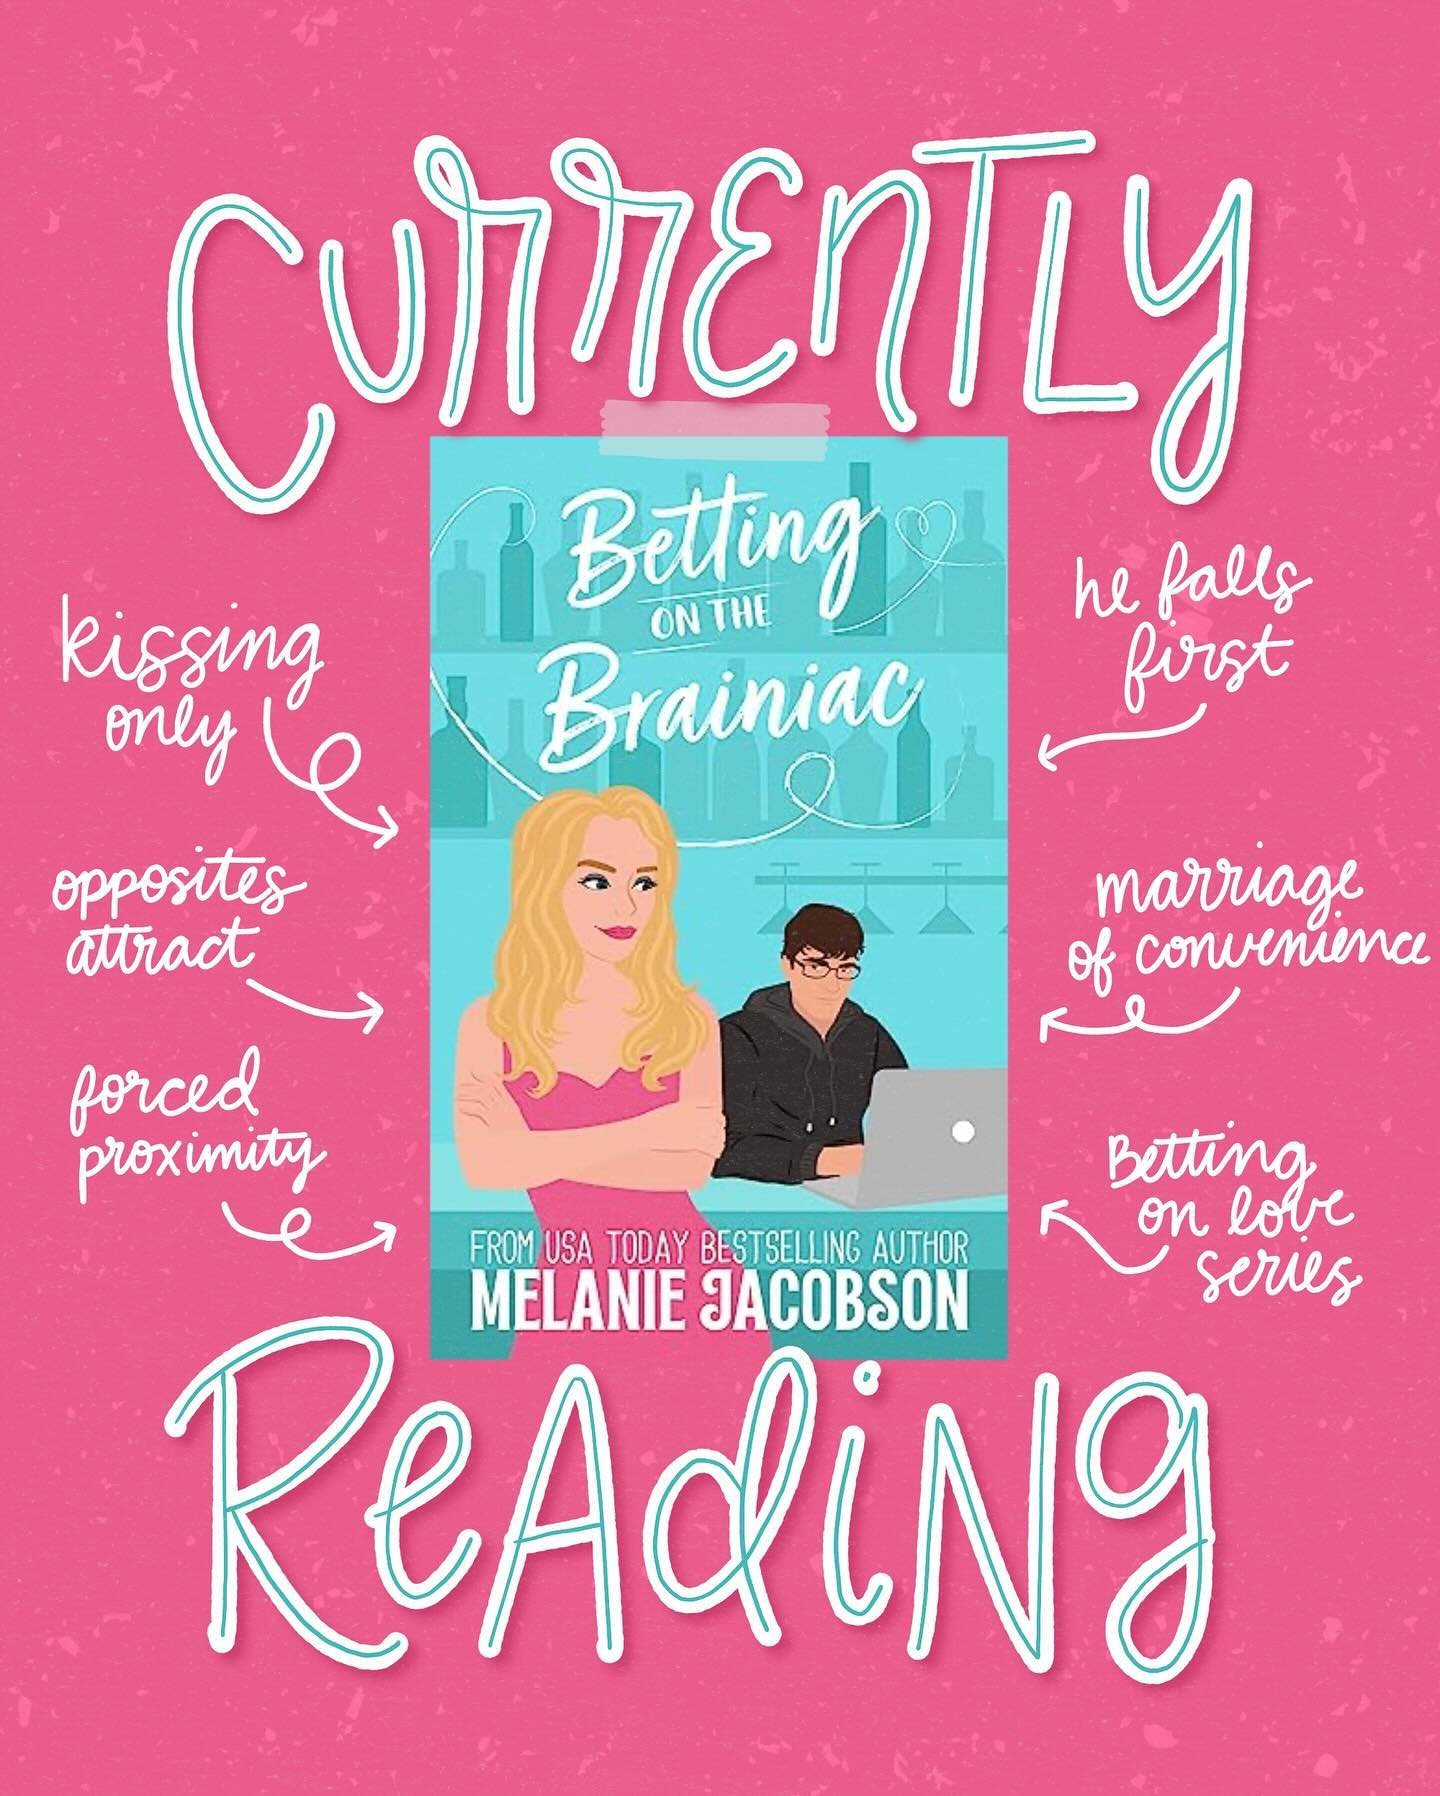 Currently Reading: Betting on the Brainiac by @melaniejacobson_books

I have really enjoyed the rest of the Betting on Love series so I am looking forward to continuing with Brainiac. As a fan of Pride and Prejudice, I am excited about any and all P&